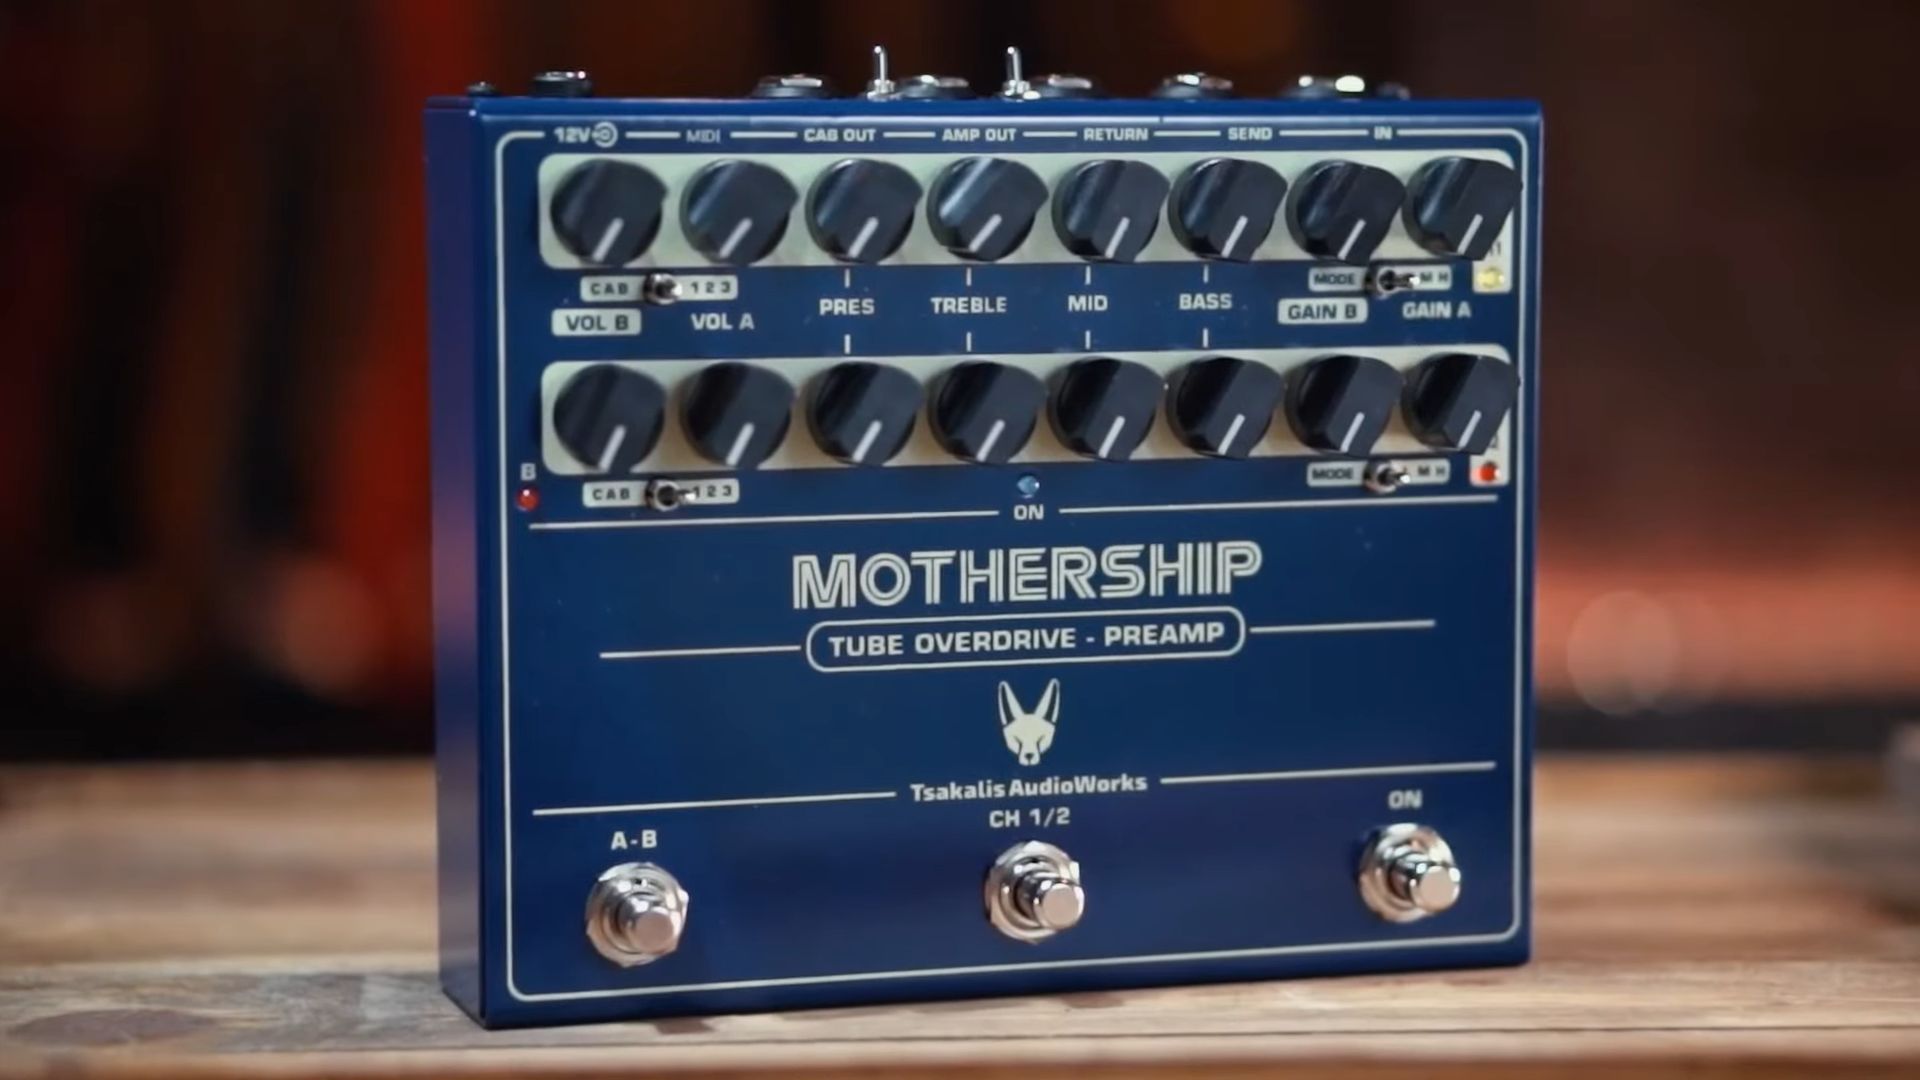 “The supreme amp-in-a-box pedal”? Tsakalis AudioWorks’ tube-loaded Mothership merges analog warmth with highly configurable cab sims in a single tube overdrive/preamp pedal